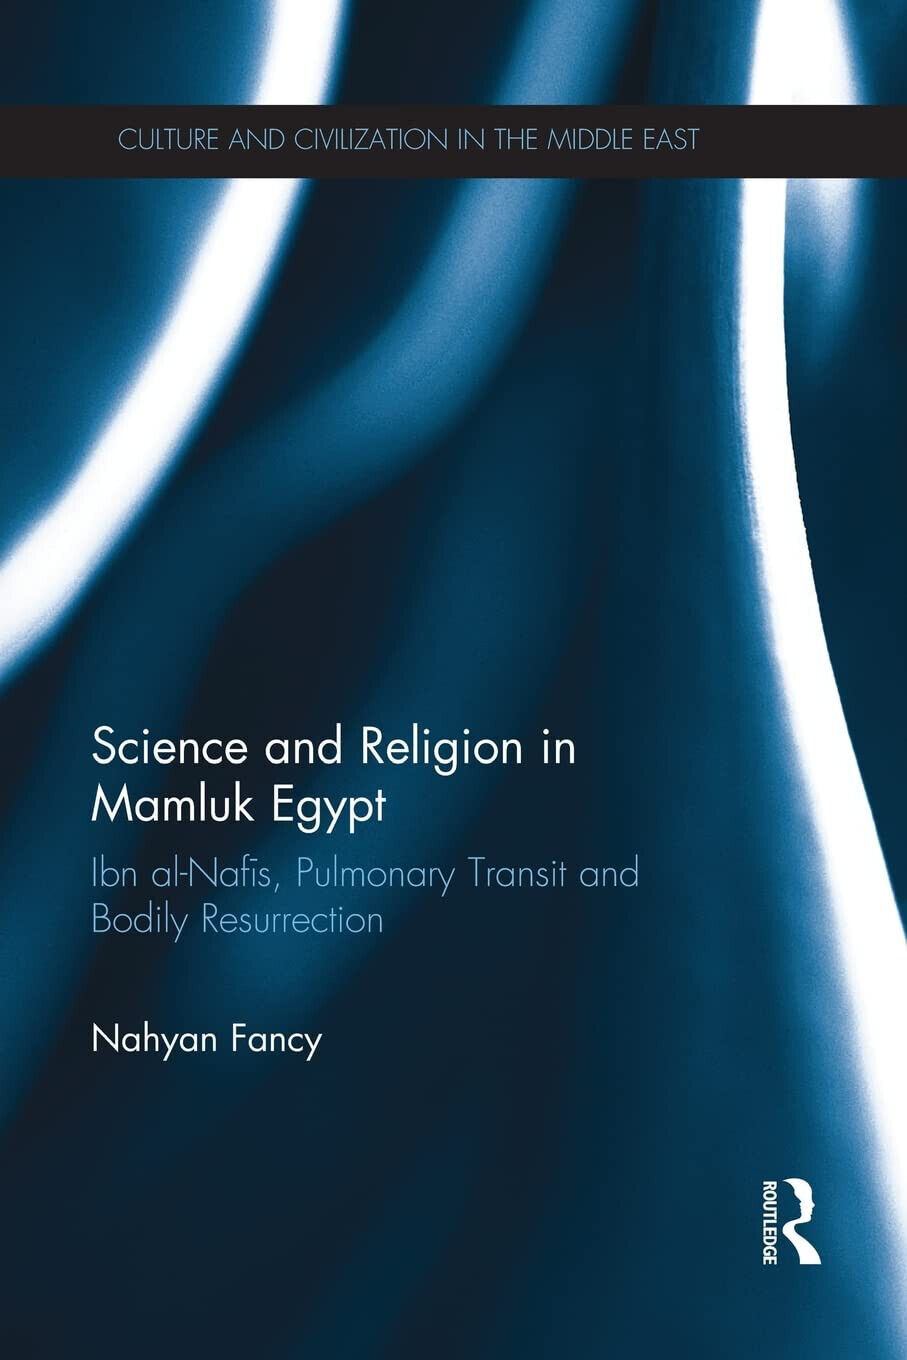 Science and Religion in Mamluk Egypt - Nahyan A. G. Fancy - Routledge, 2015 libro usato